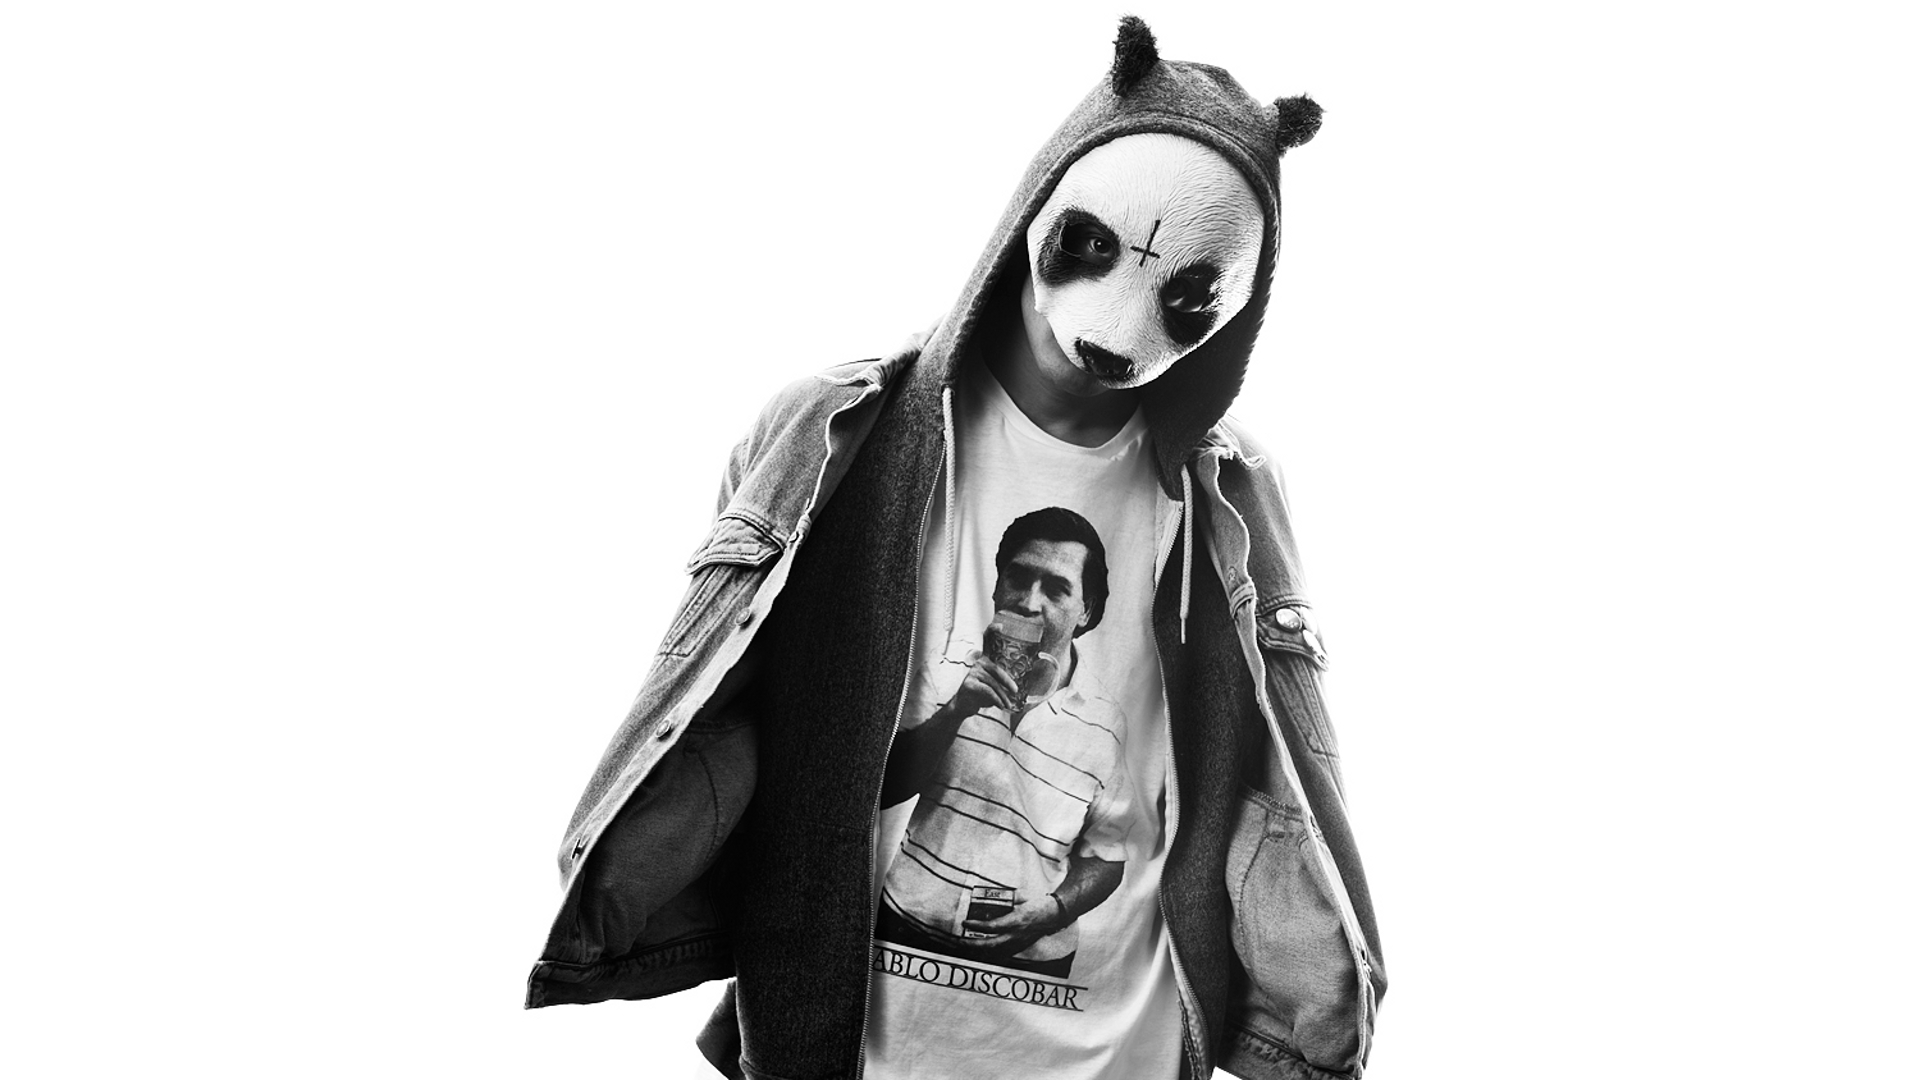 cro wallpaper,clothing,costume,outerwear,mask,black and white